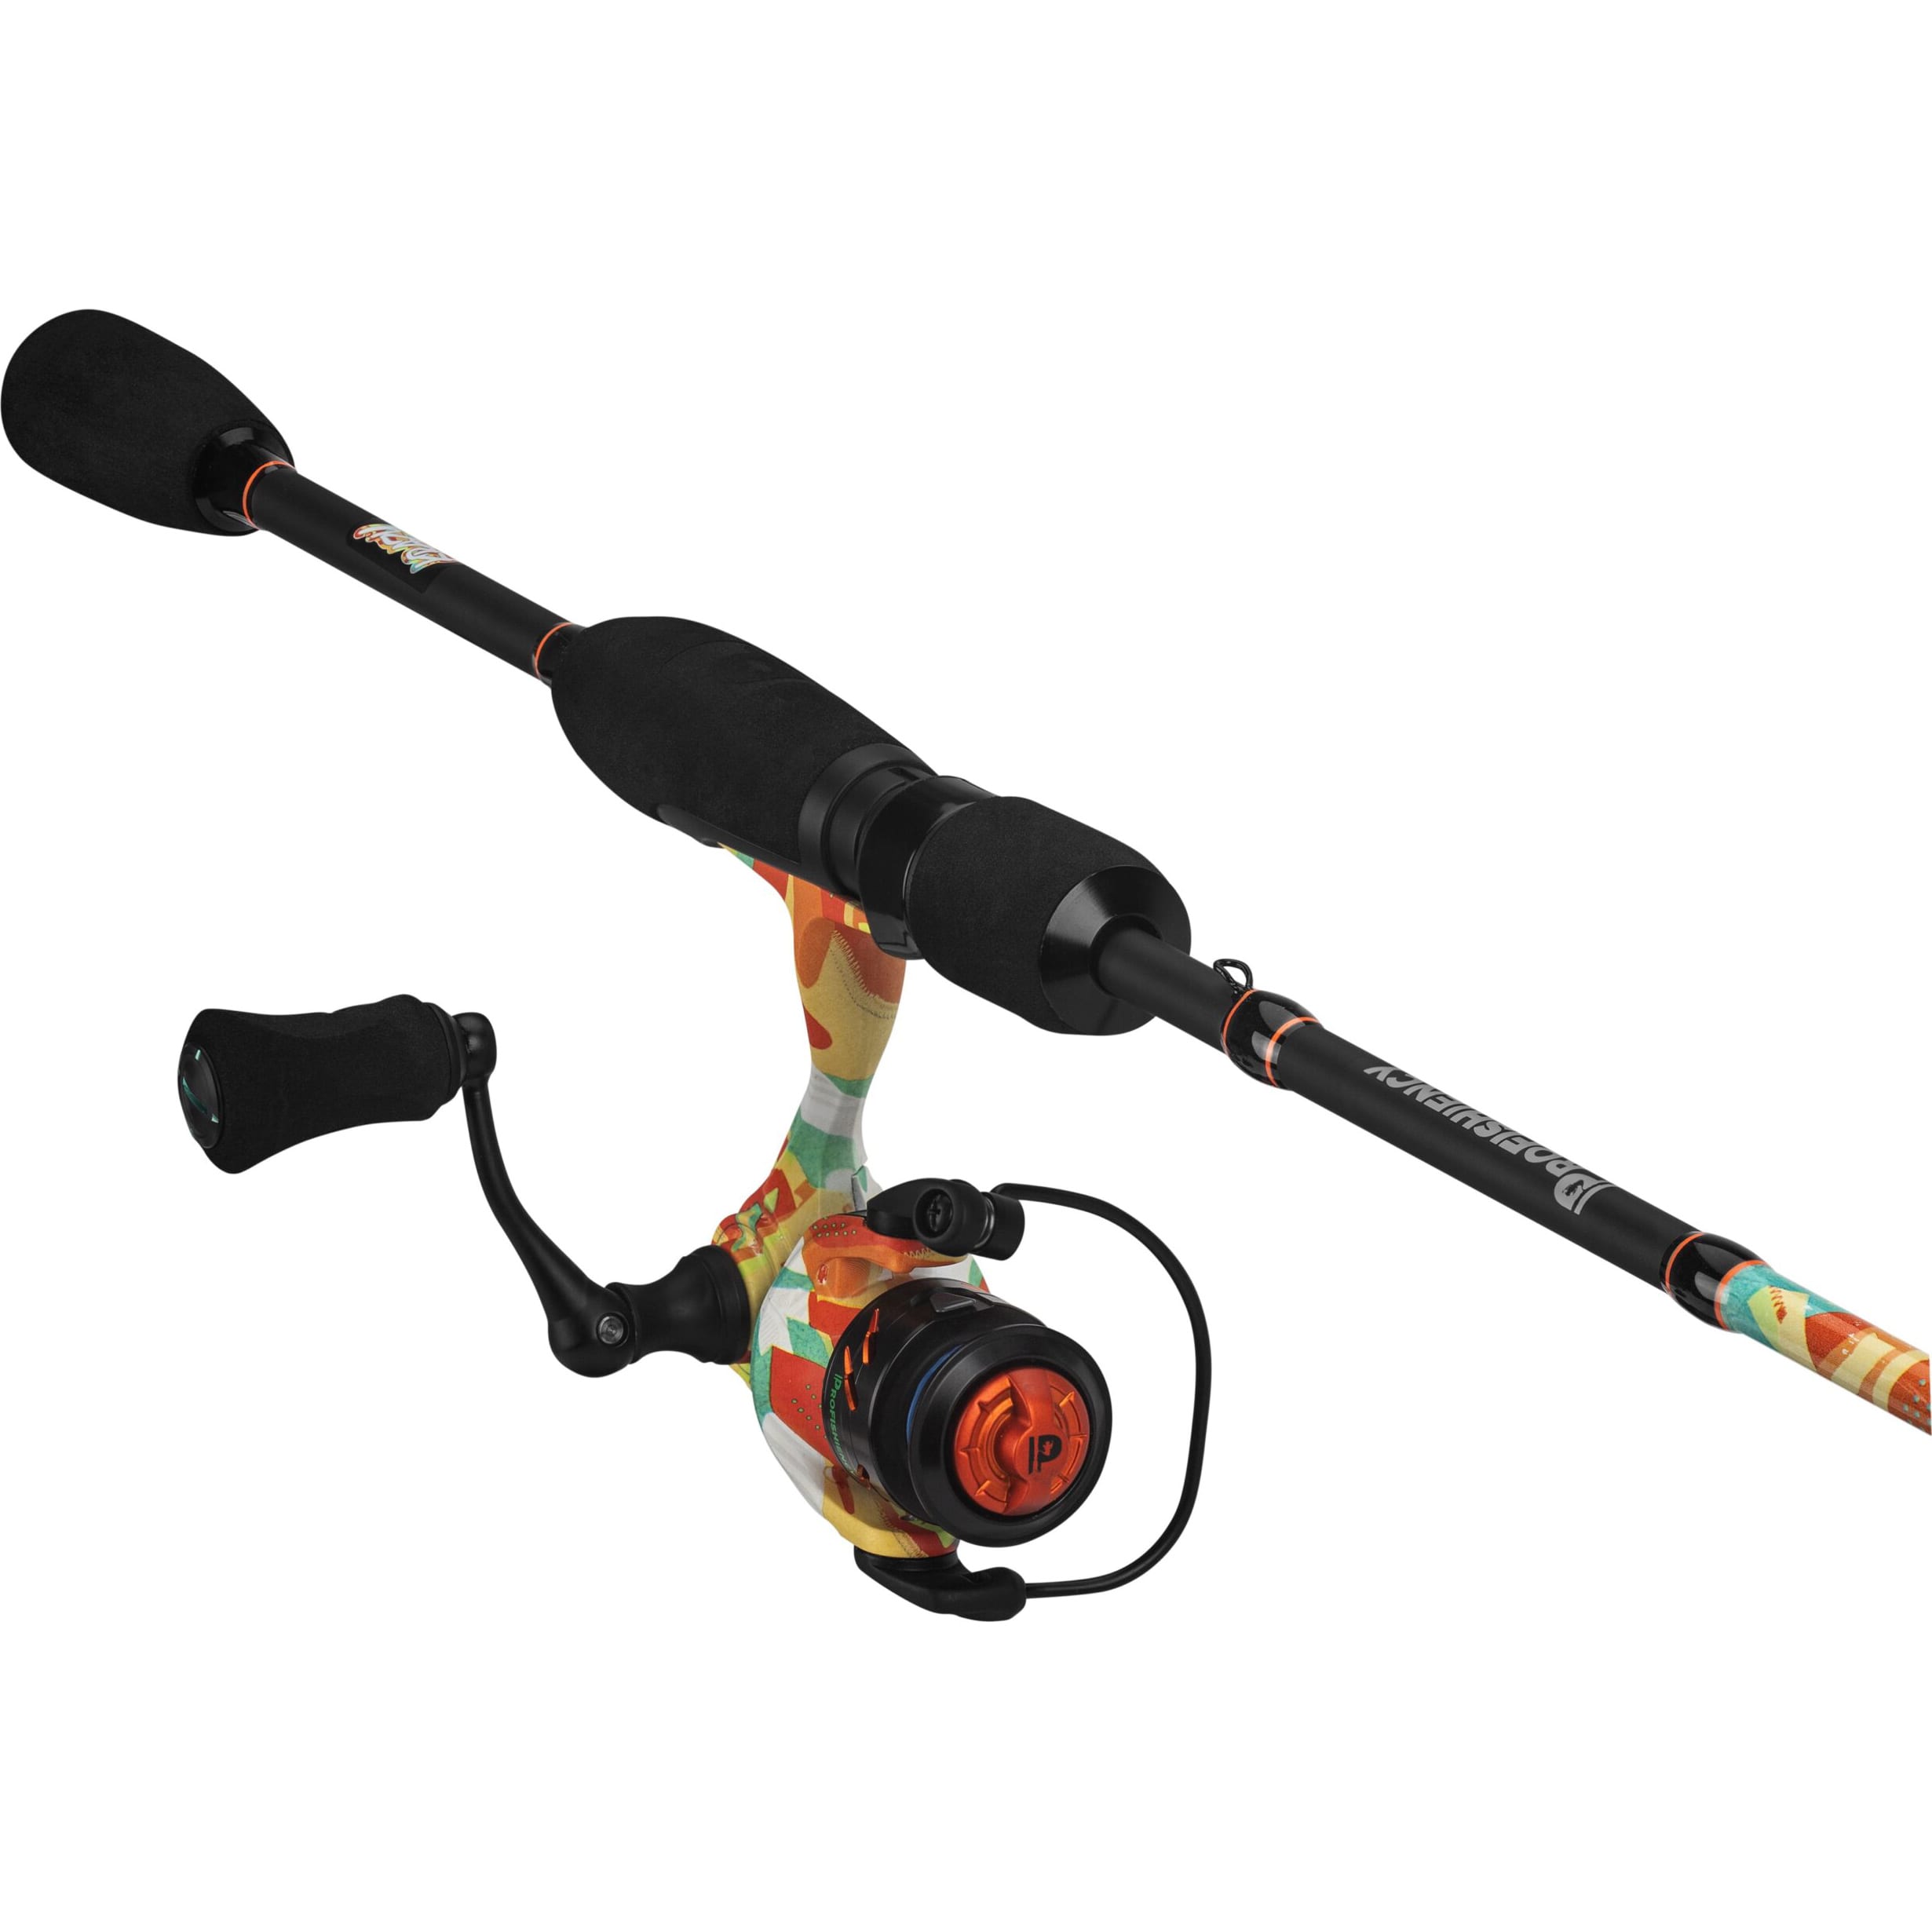  Anything Possible Krzy731Rr: Krazy Baitcast Reel 7.3:1 (Right  Retrieve) : Sports & Outdoors